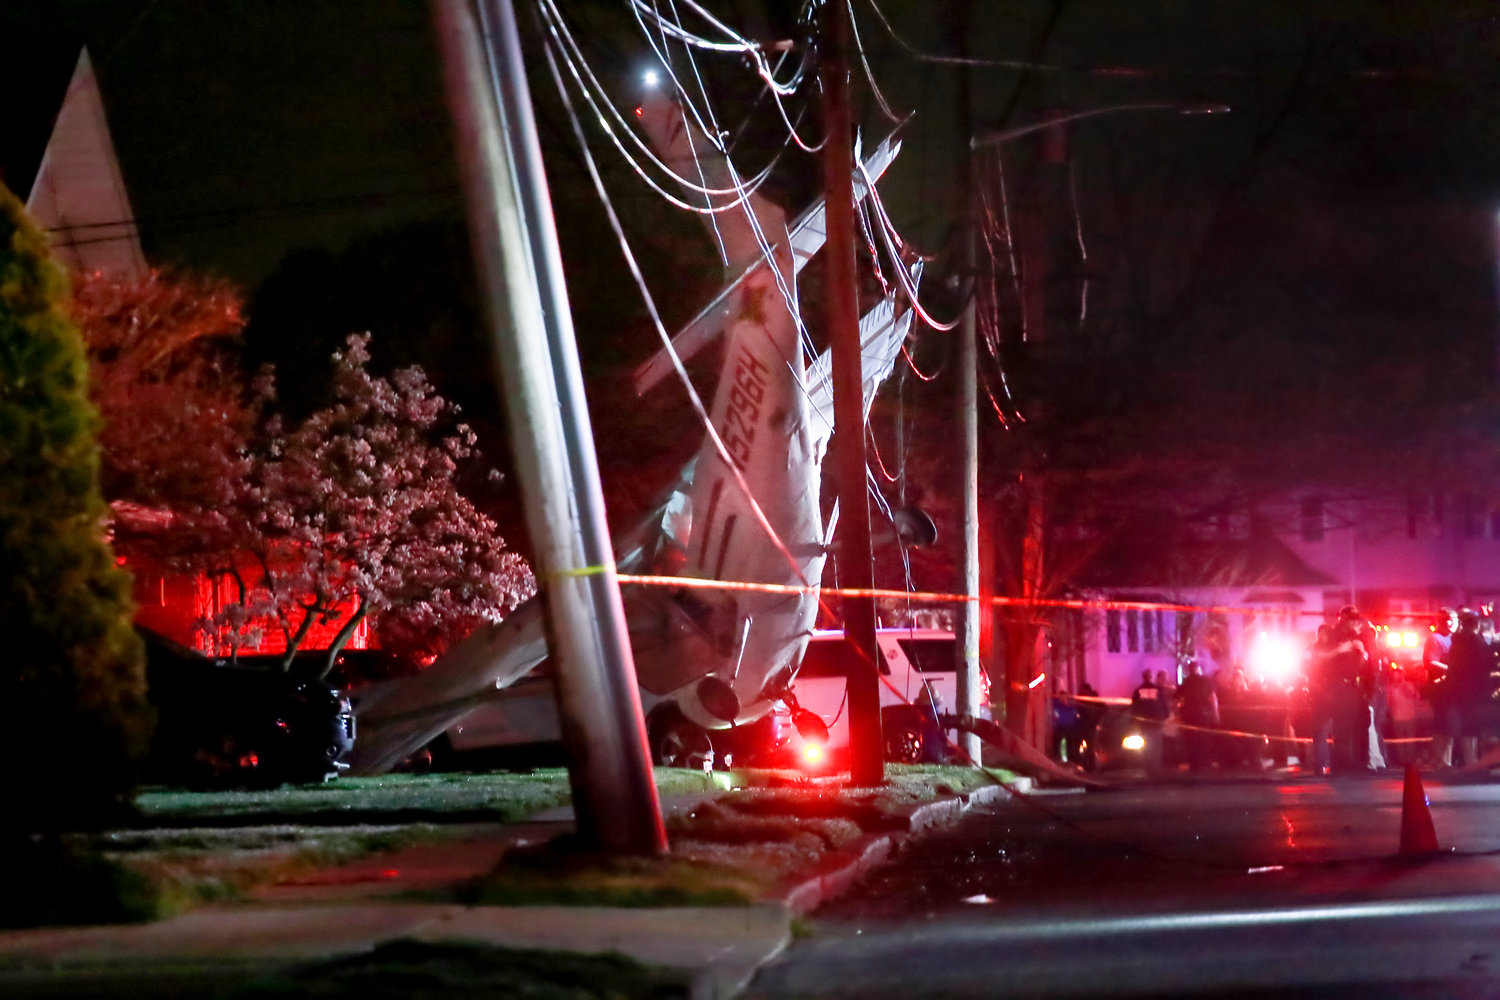 A single-engine prop plane was suspended a foot off the ground by power lines it crashed into in front of a Clarendon Drive home on Sunday. The pilot and passengers were unharmed.